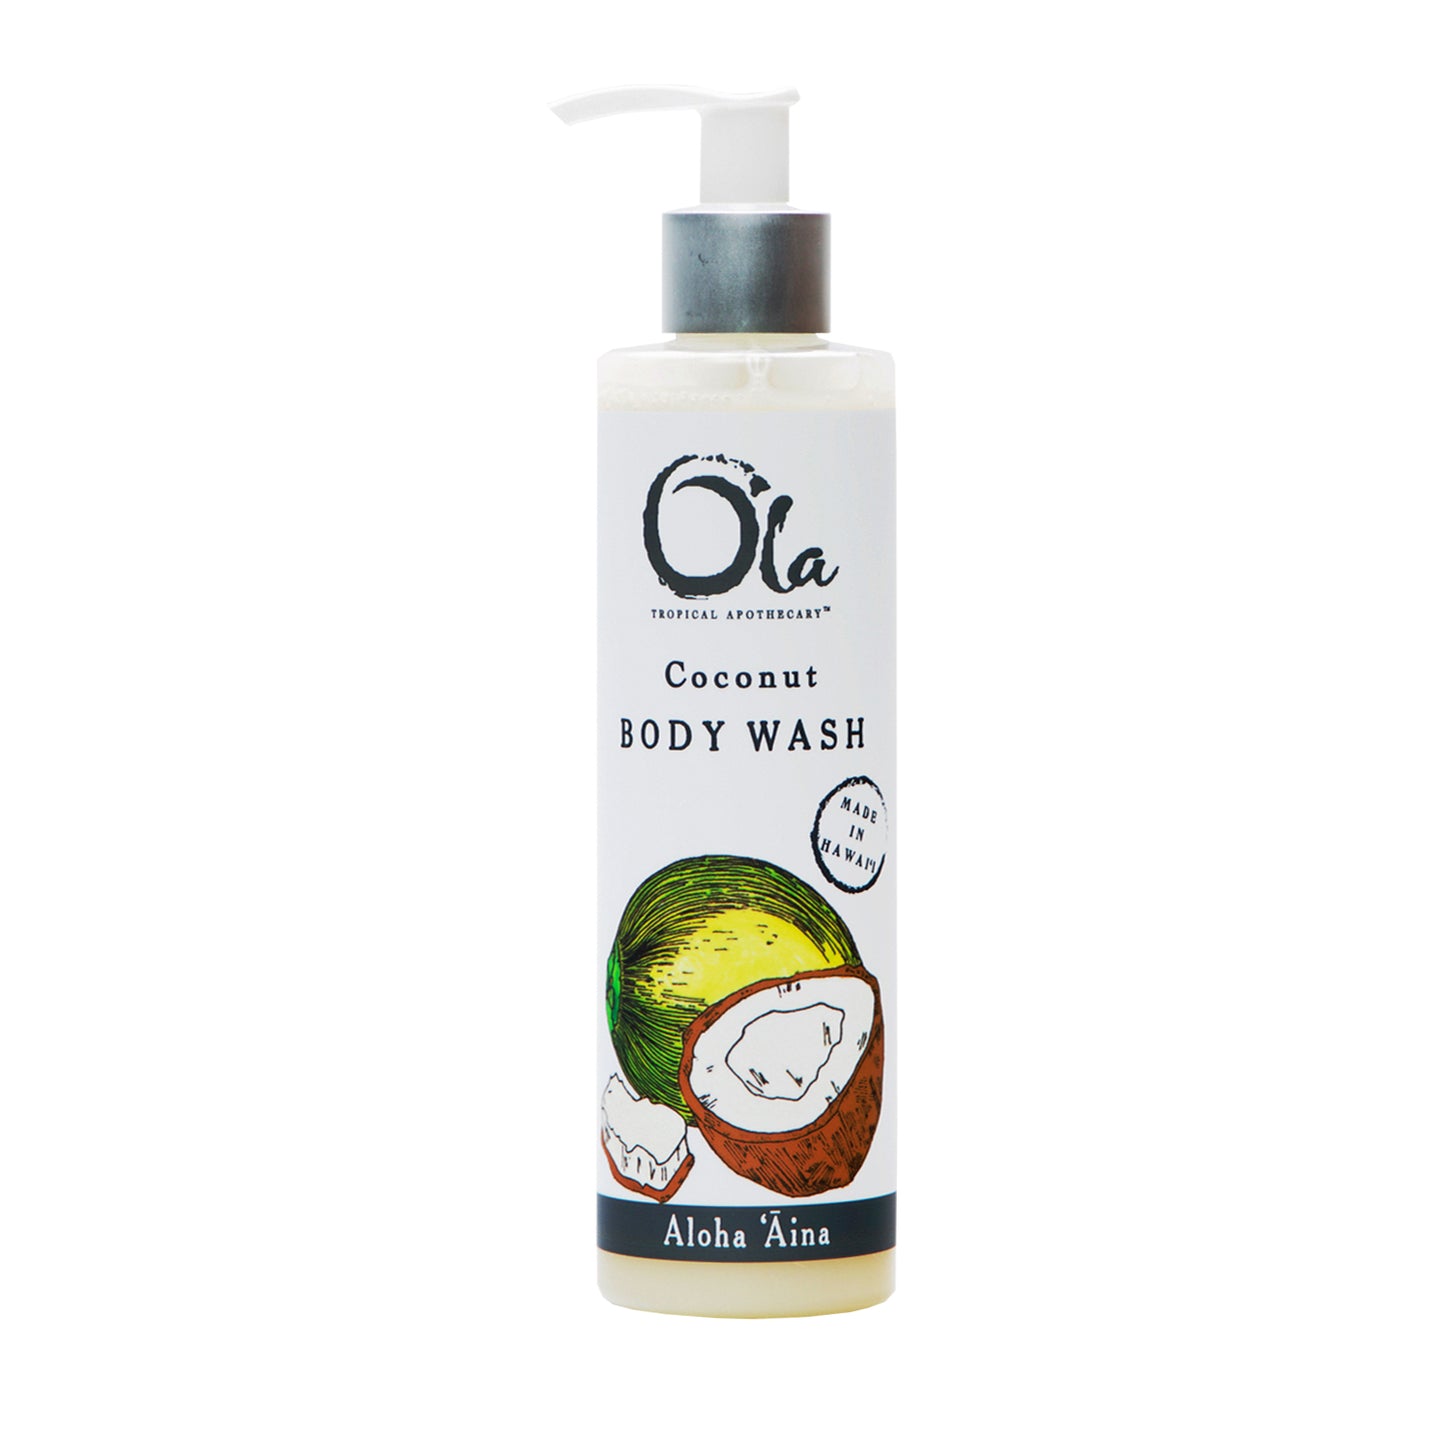 Ola Coconut Body Wash with Pure Tropical Oils and Plant Extracts 8 fl oz